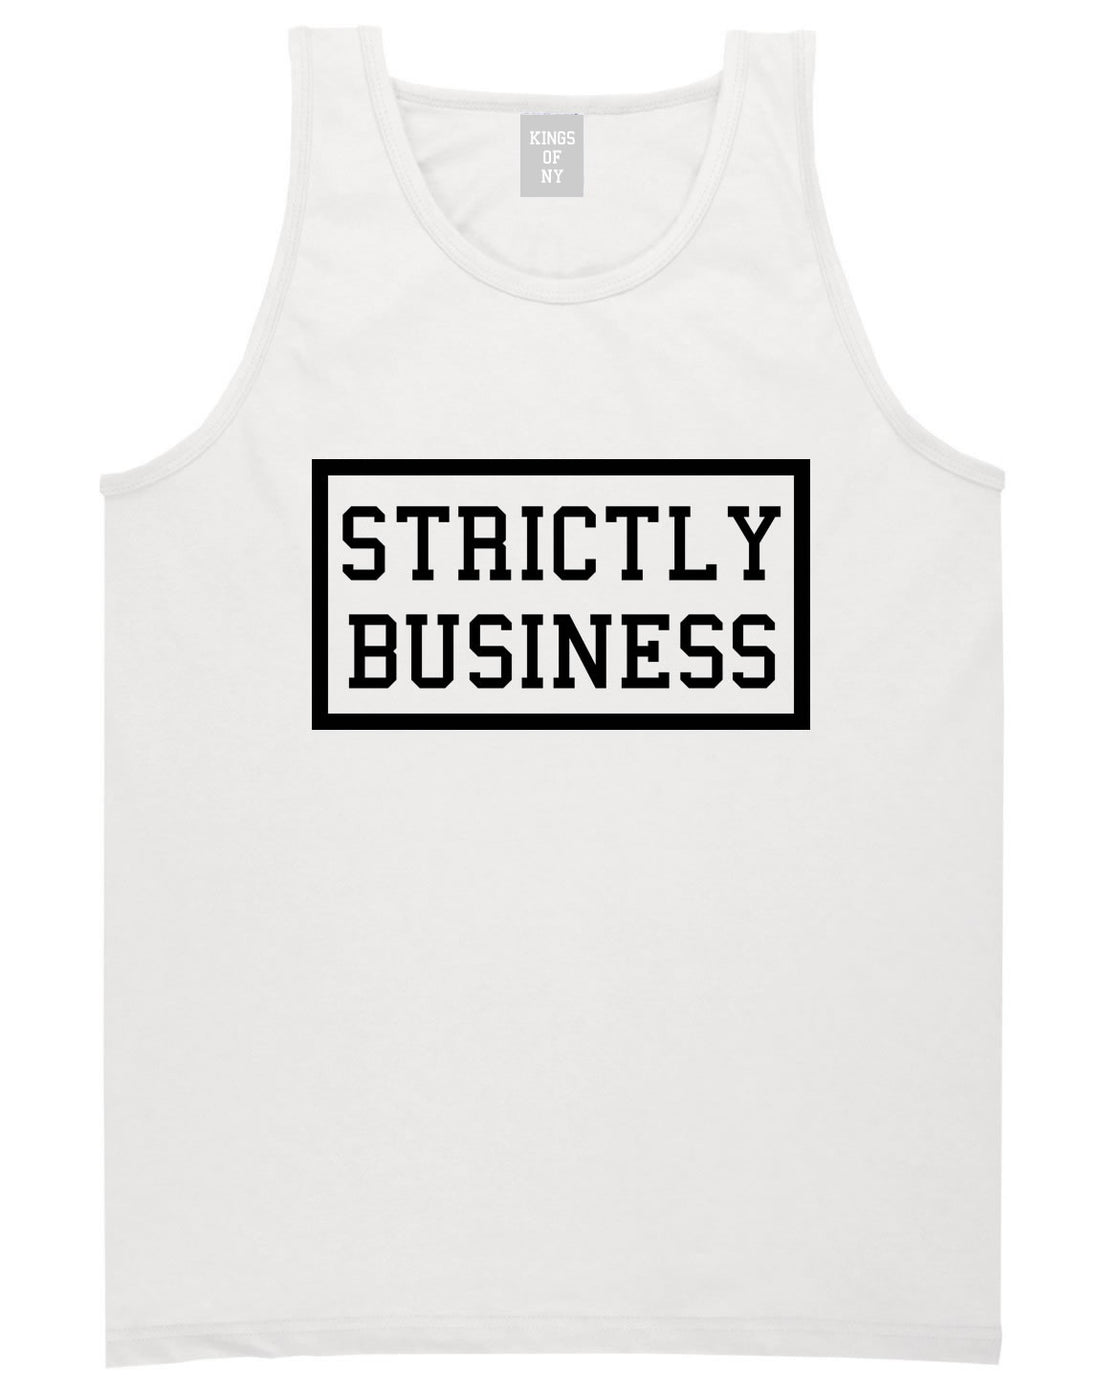 Strictly Business Tank Top in White by Kings Of NY